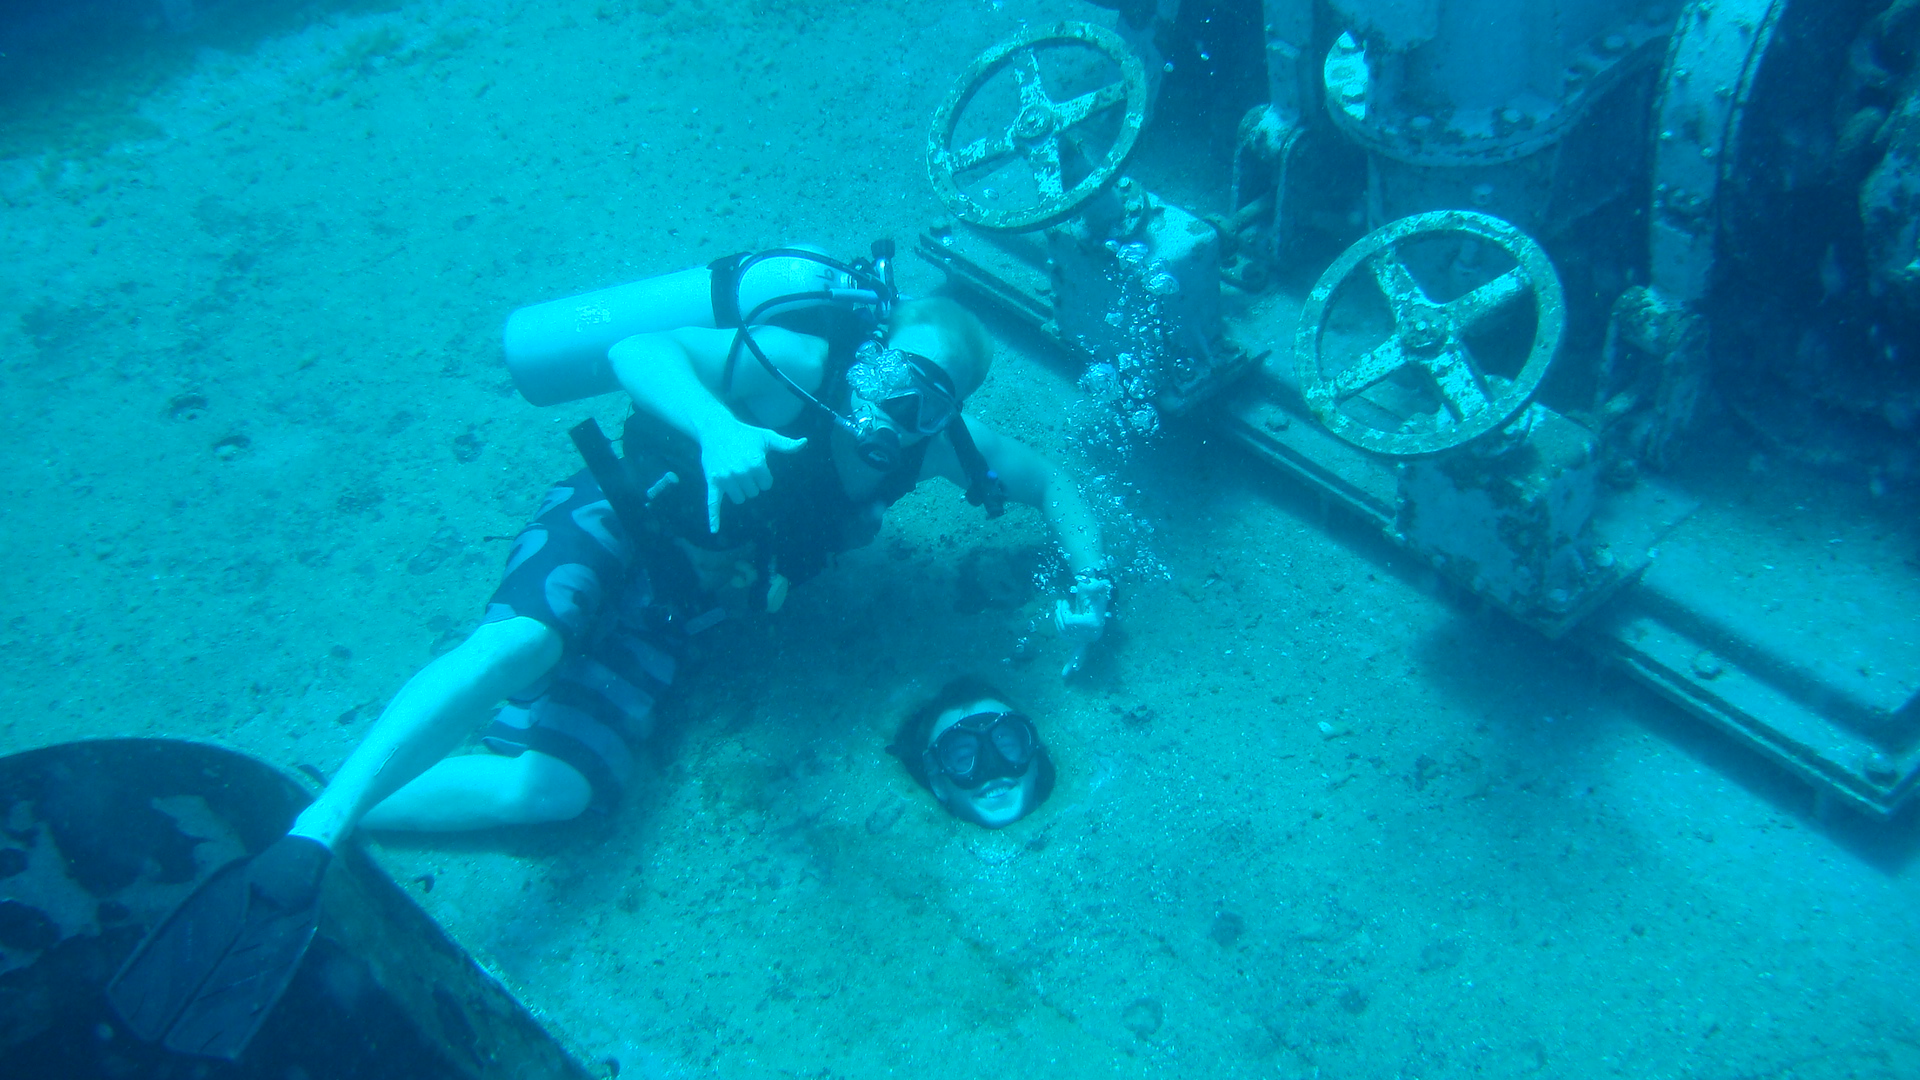 Chad and Chad diving on the Kittywake